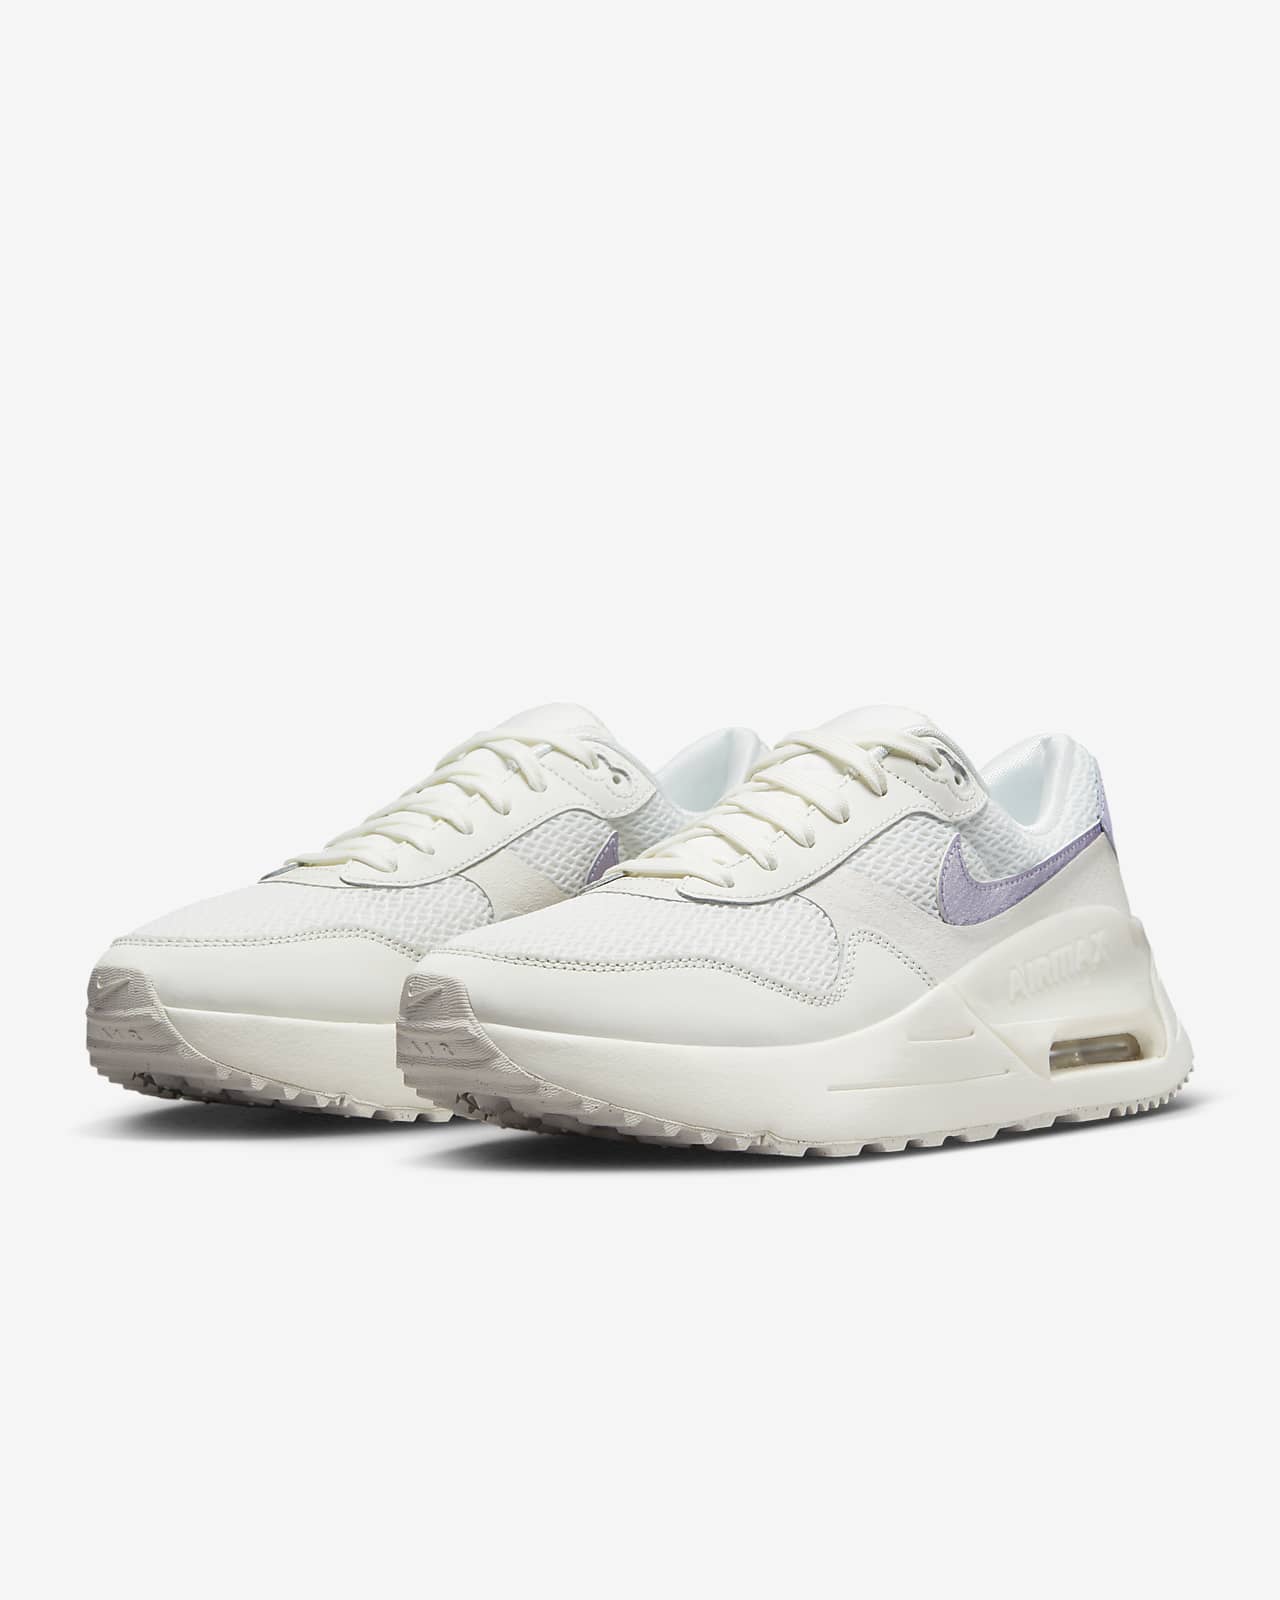 The Nike Air Max SYSTM Texas is Available Now - Texas Sneakers